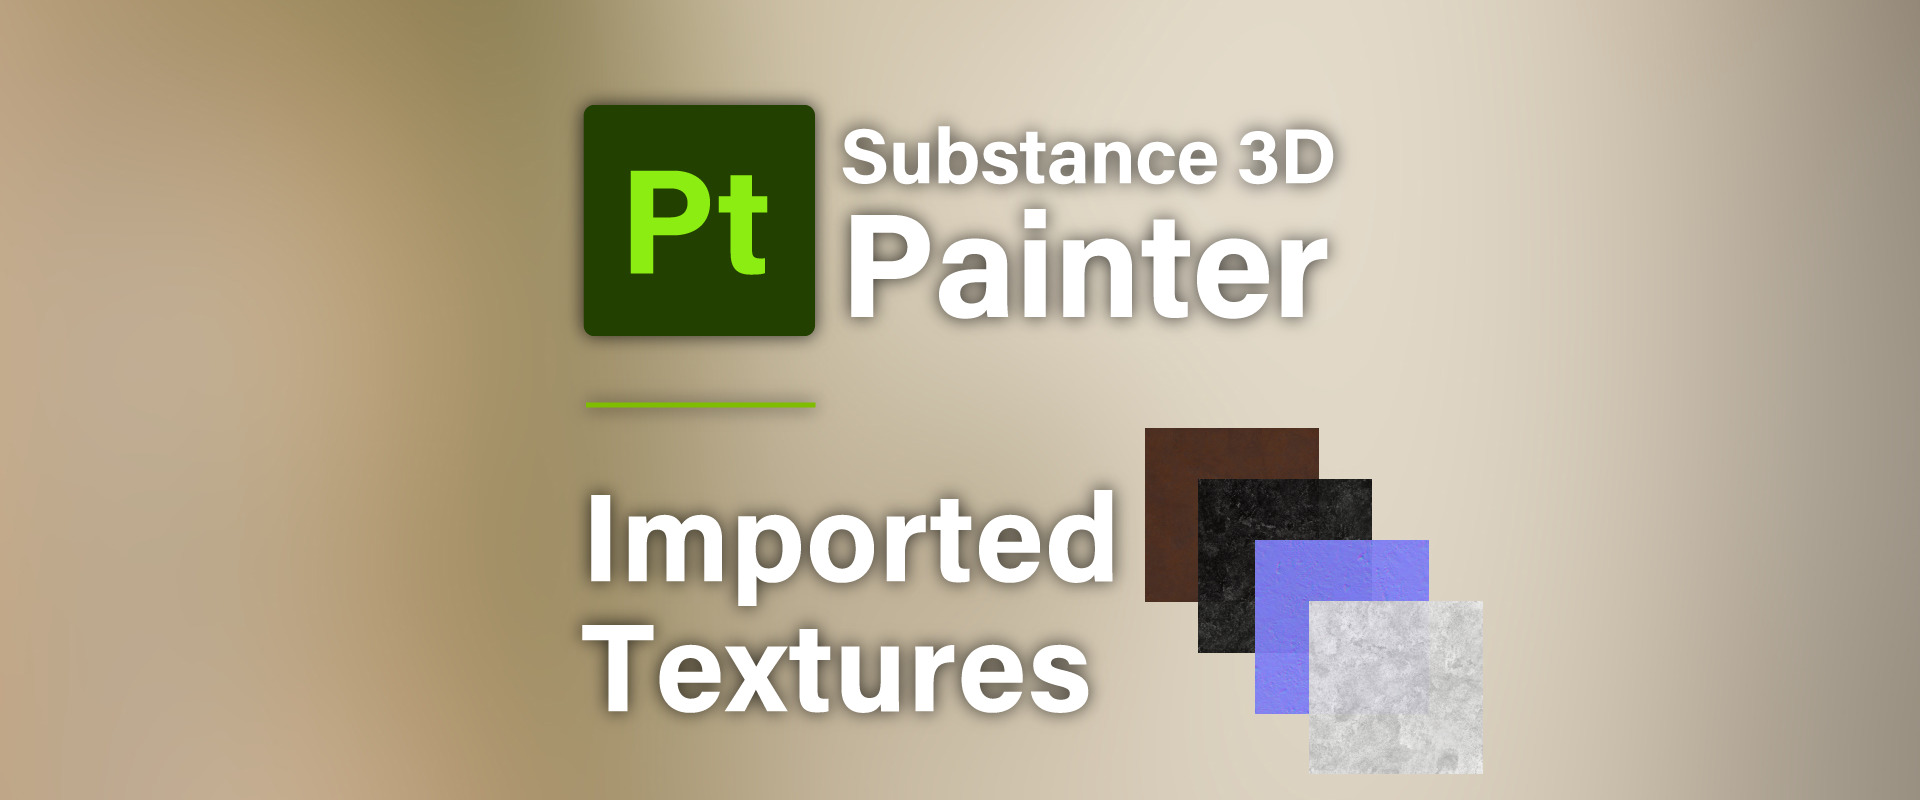 [ Substance 3D Painter ] How to set imported textures